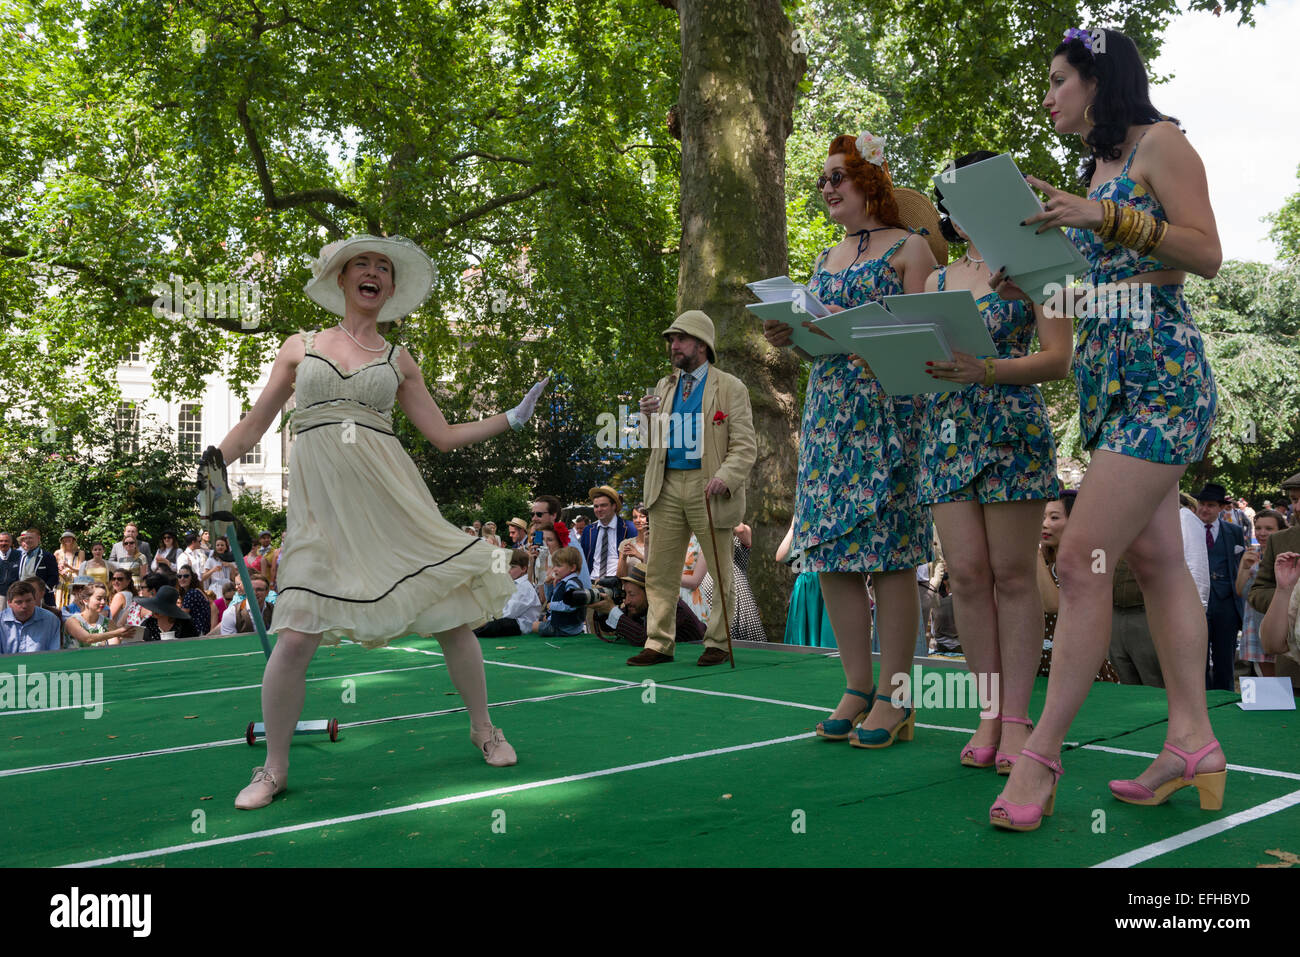 The 10 Anniversary of the Chap Olympiad. A sartorial gathering of chaps and chapesses in Bloomsbury London. Various Chap sports are held at a picnic in the square. This event is the Well Dressage competition, London, England Stock Photo